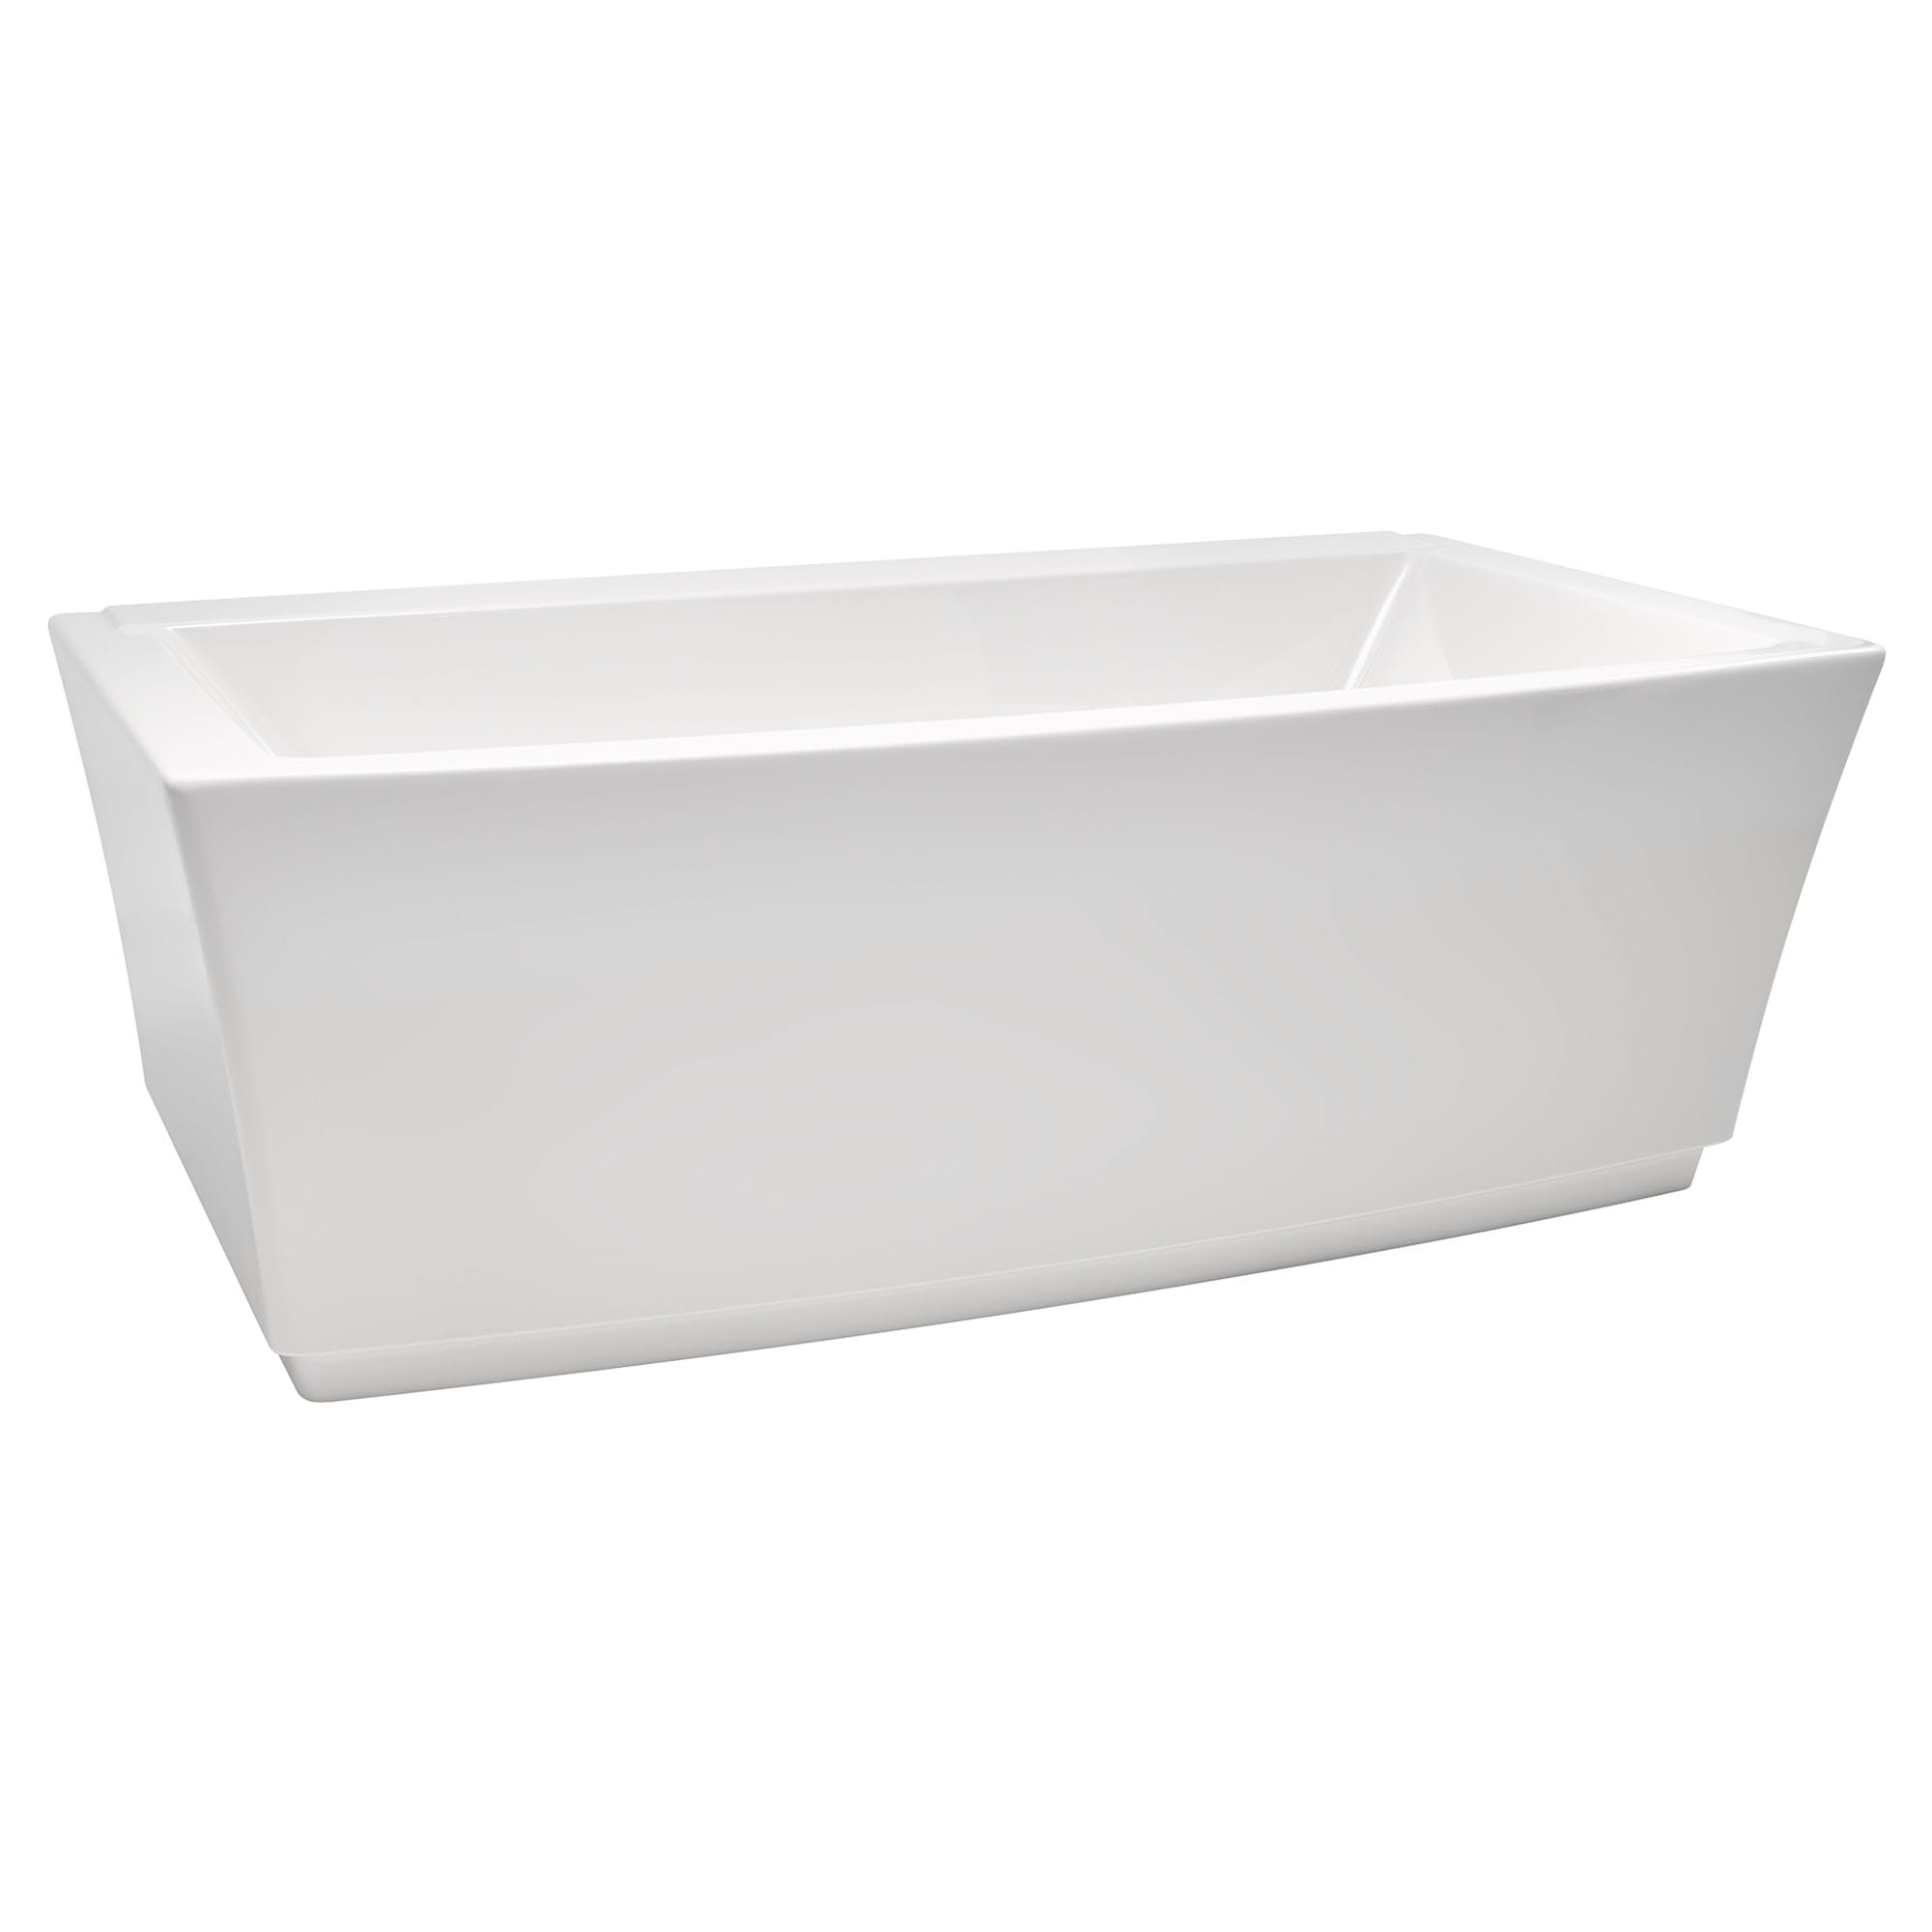 Townsend 68 x 36 Inch Freestanding Bathtub Center Drain With Integrated Overflow WHITE